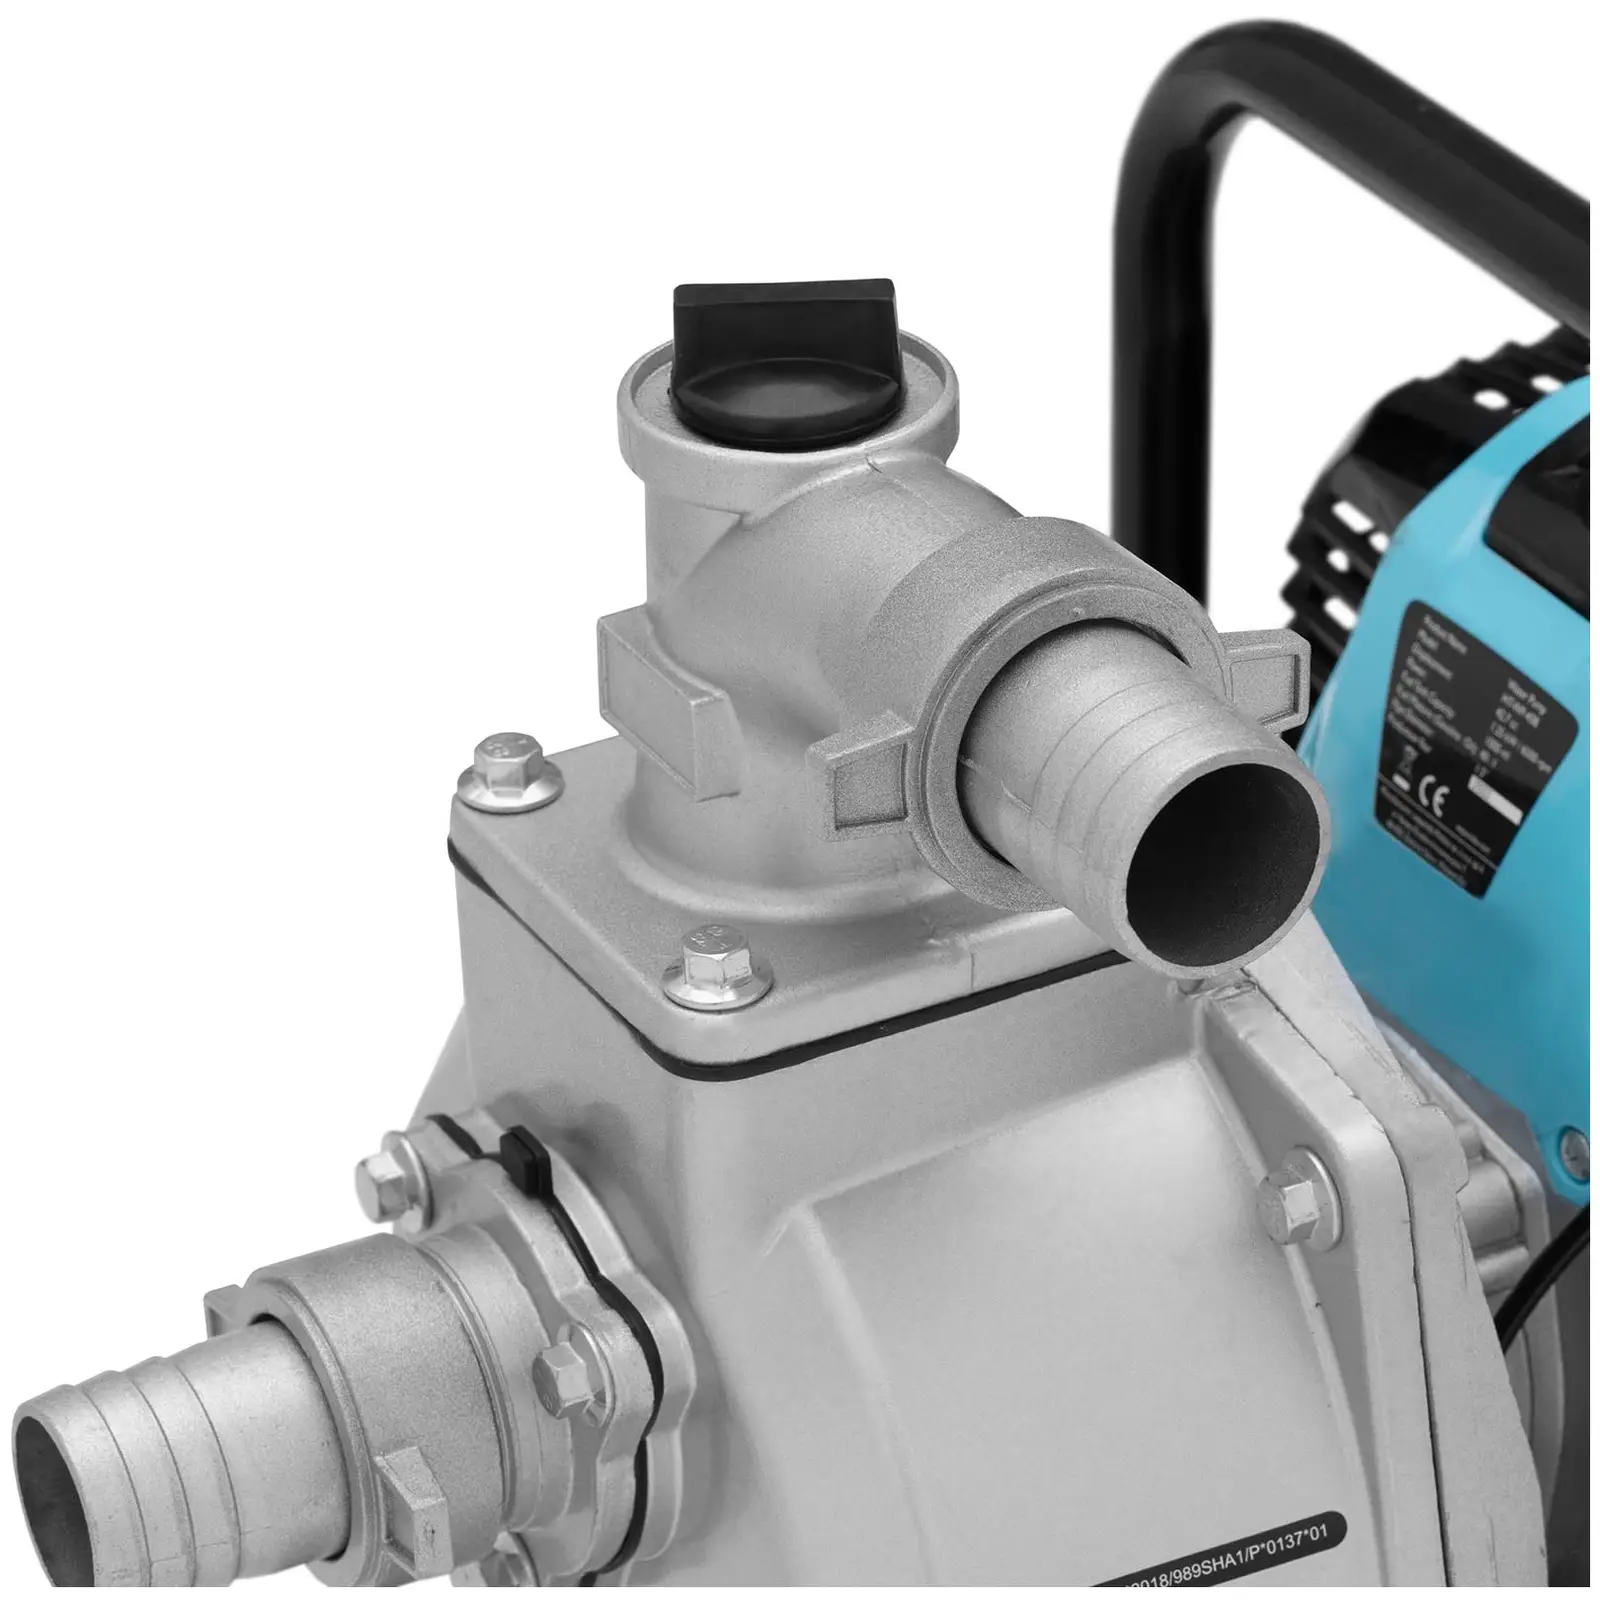 Water pump - 1.2 kW - 15 m³/h - with flat hose - 1 1/2" - 50 m - 0 - 7 bar